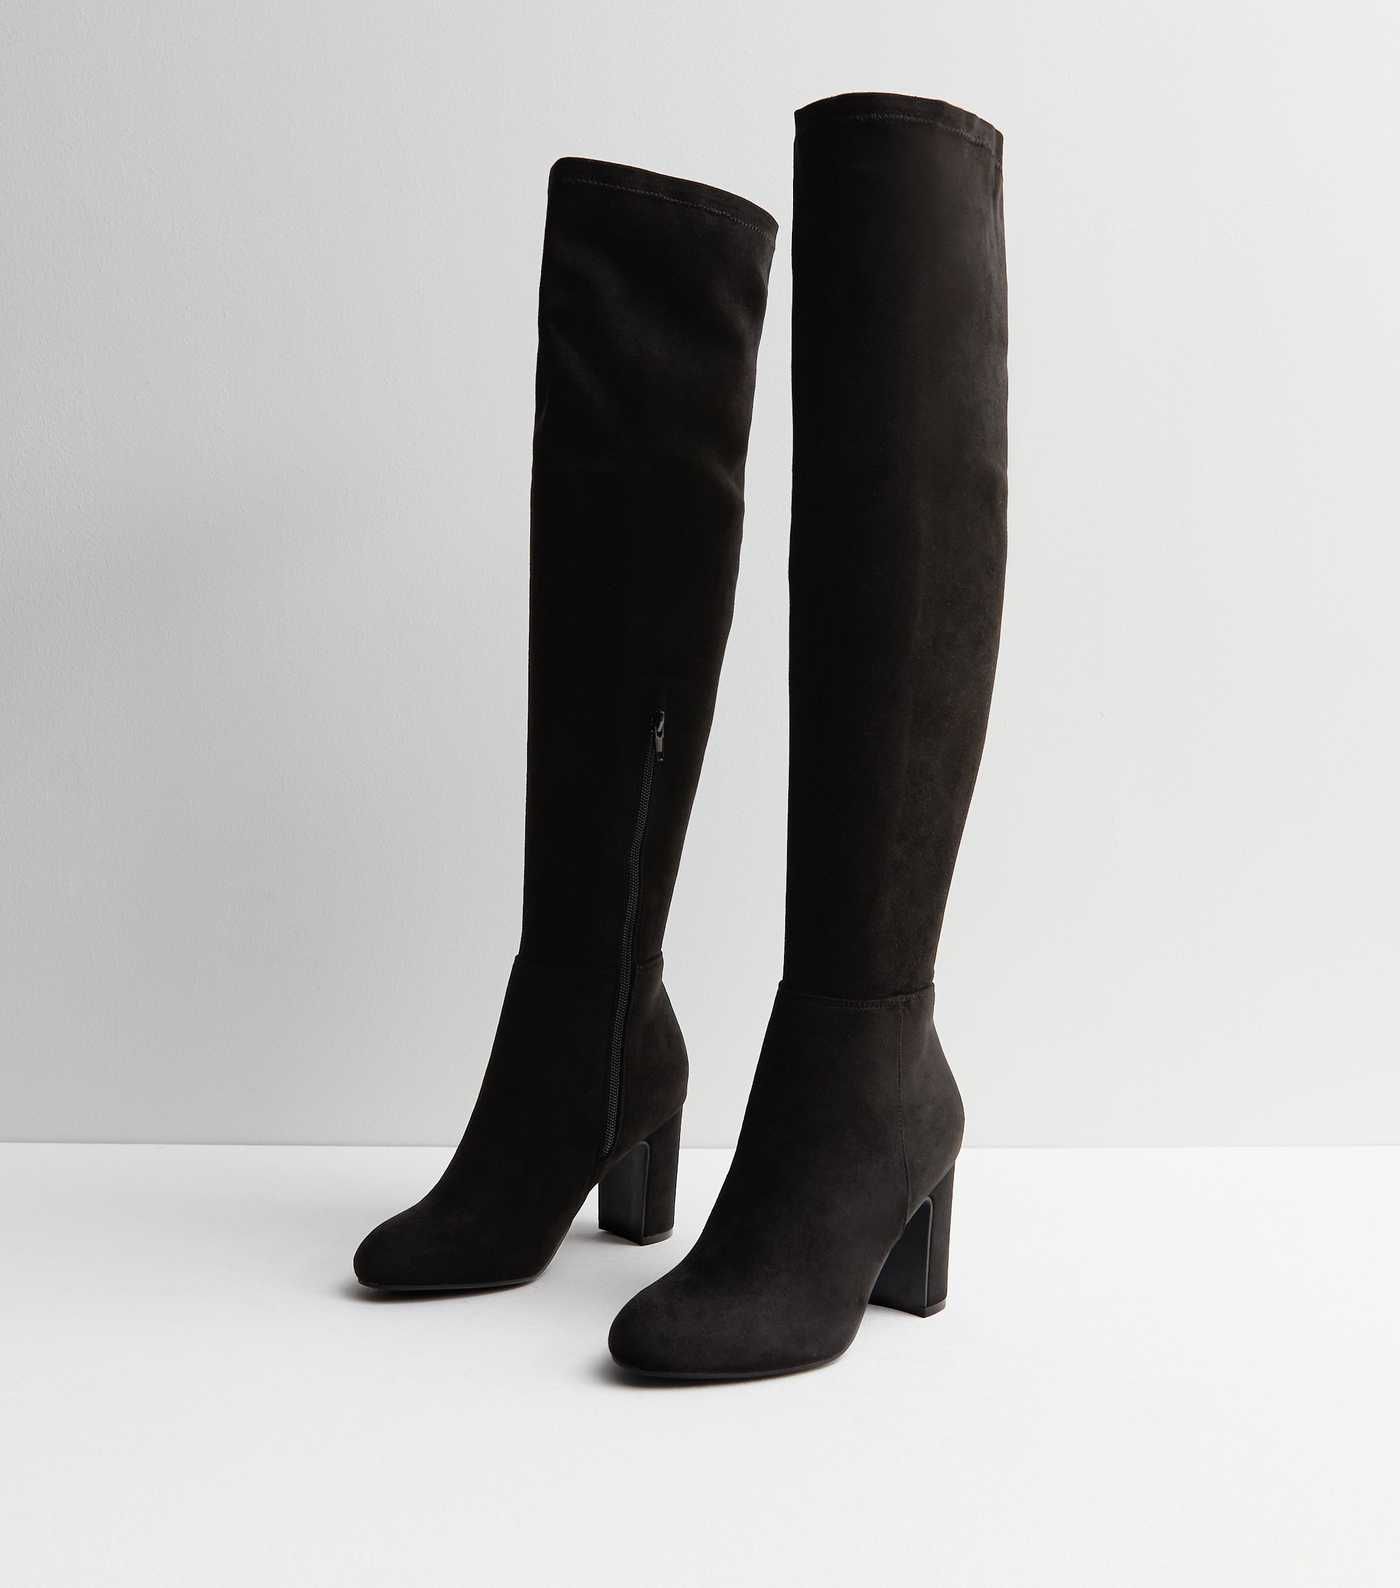 Black Suedette Over the Knee Block Heel Boots
						
						Add to Saved Items
						Remove from S... | New Look (UK)